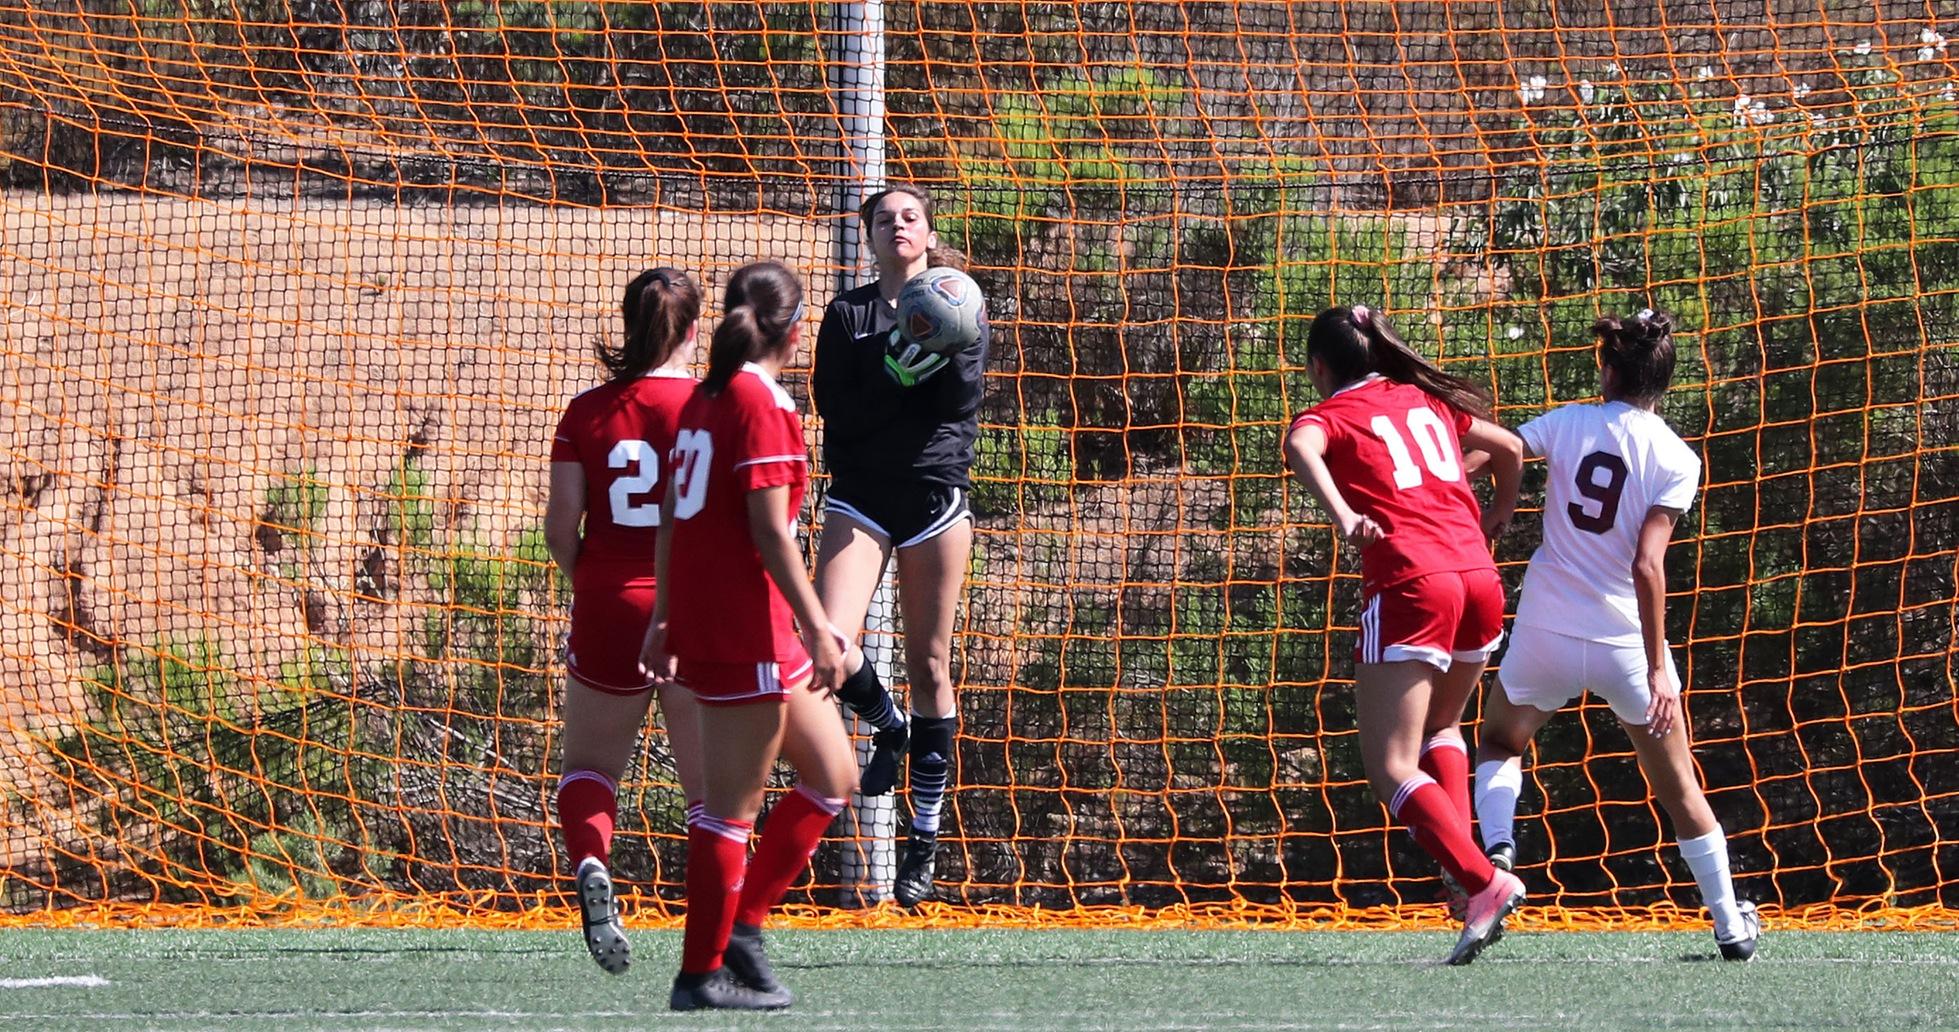 Goalie Kassandra Blanchard with a save in the first half. Photo by Hugh Cox.